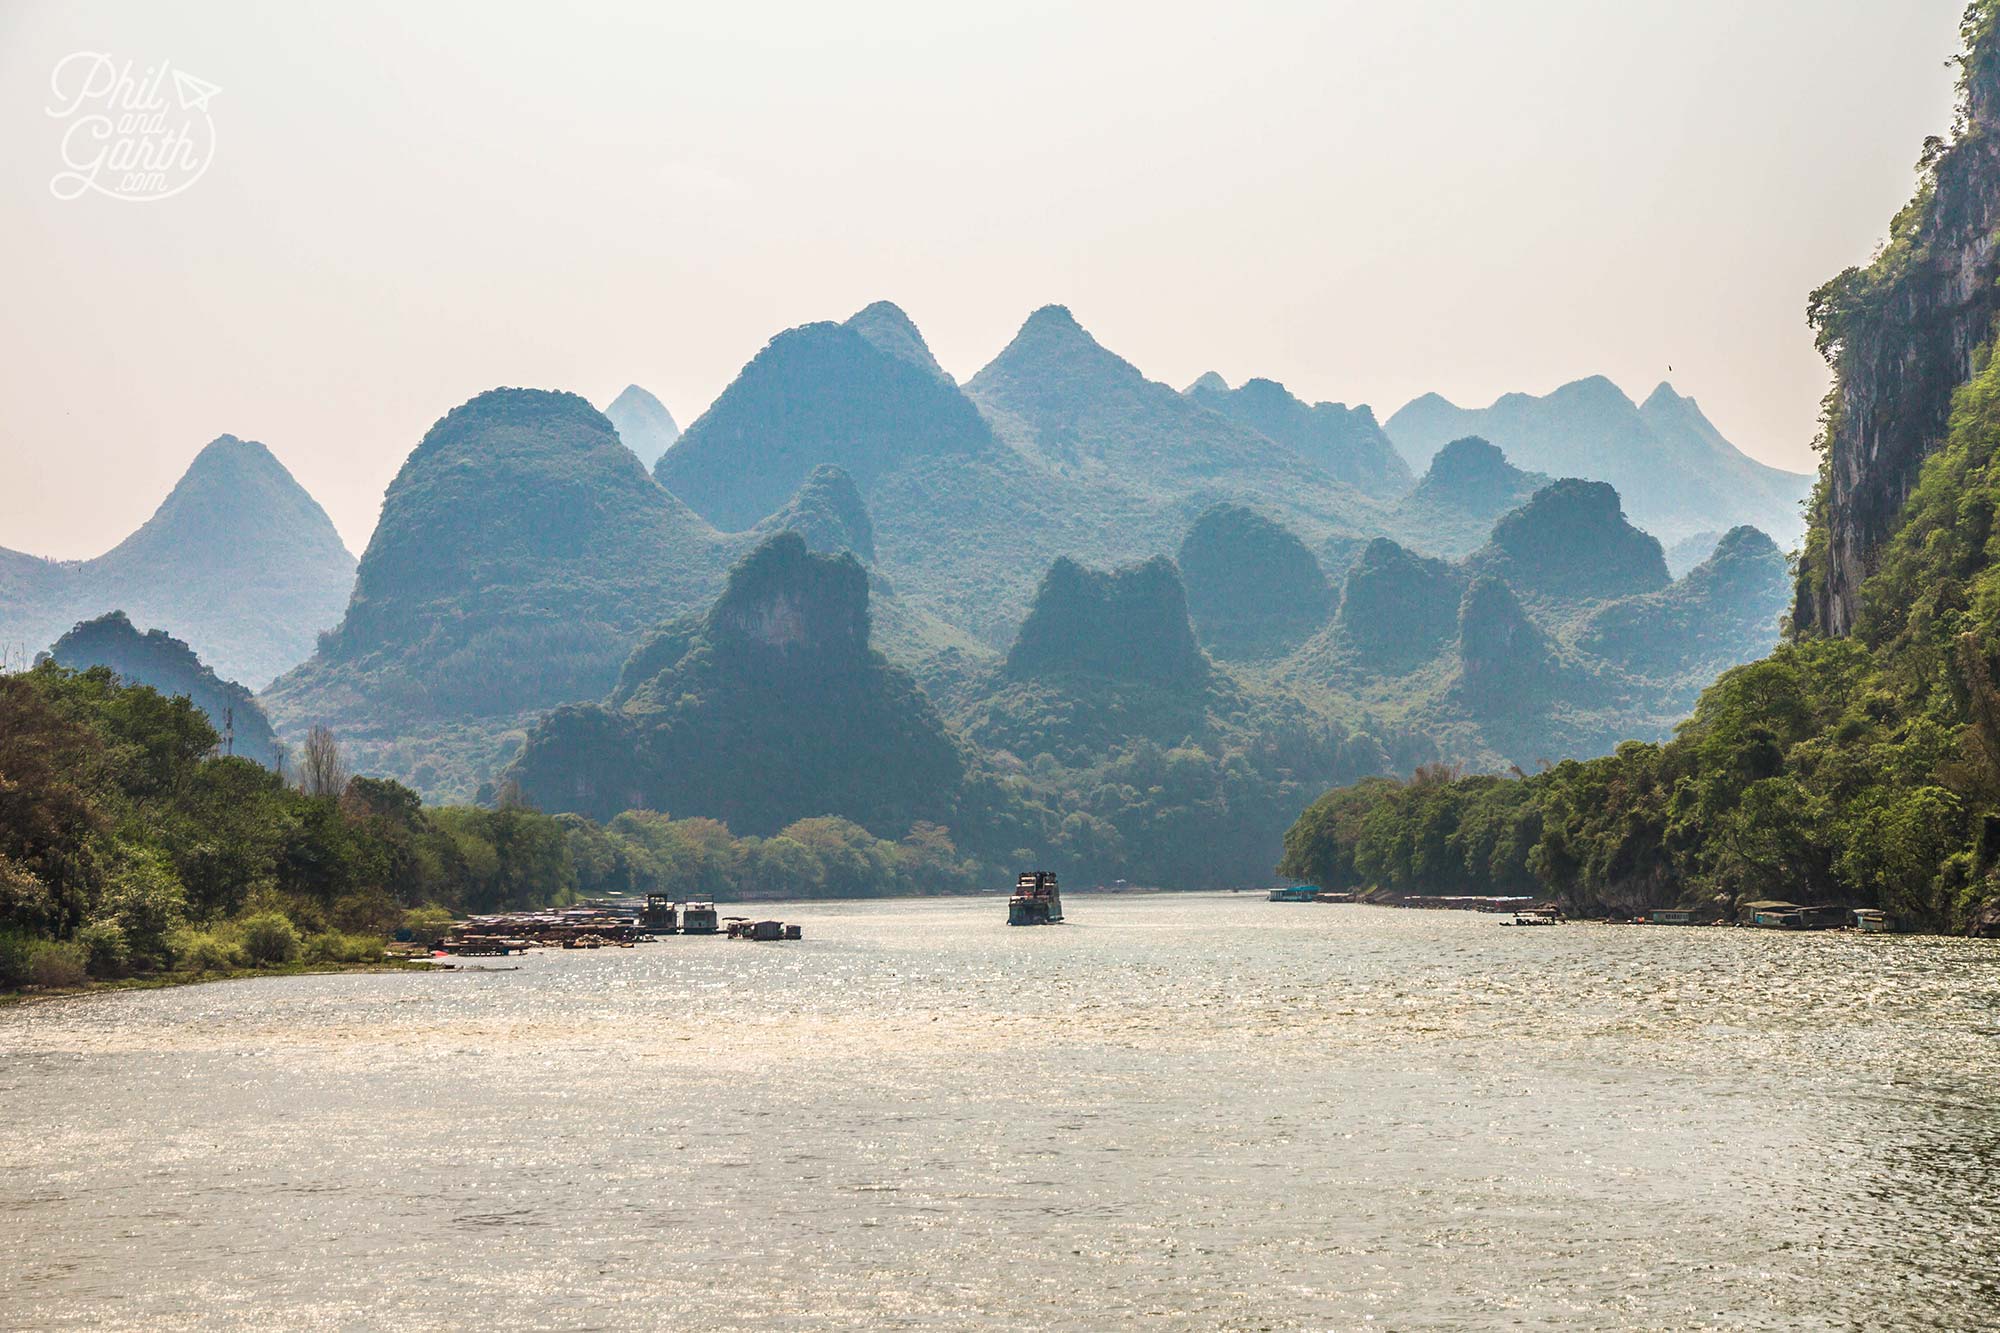 Our Li River cruise takes 4 hours to reach Yangshou from Guilin